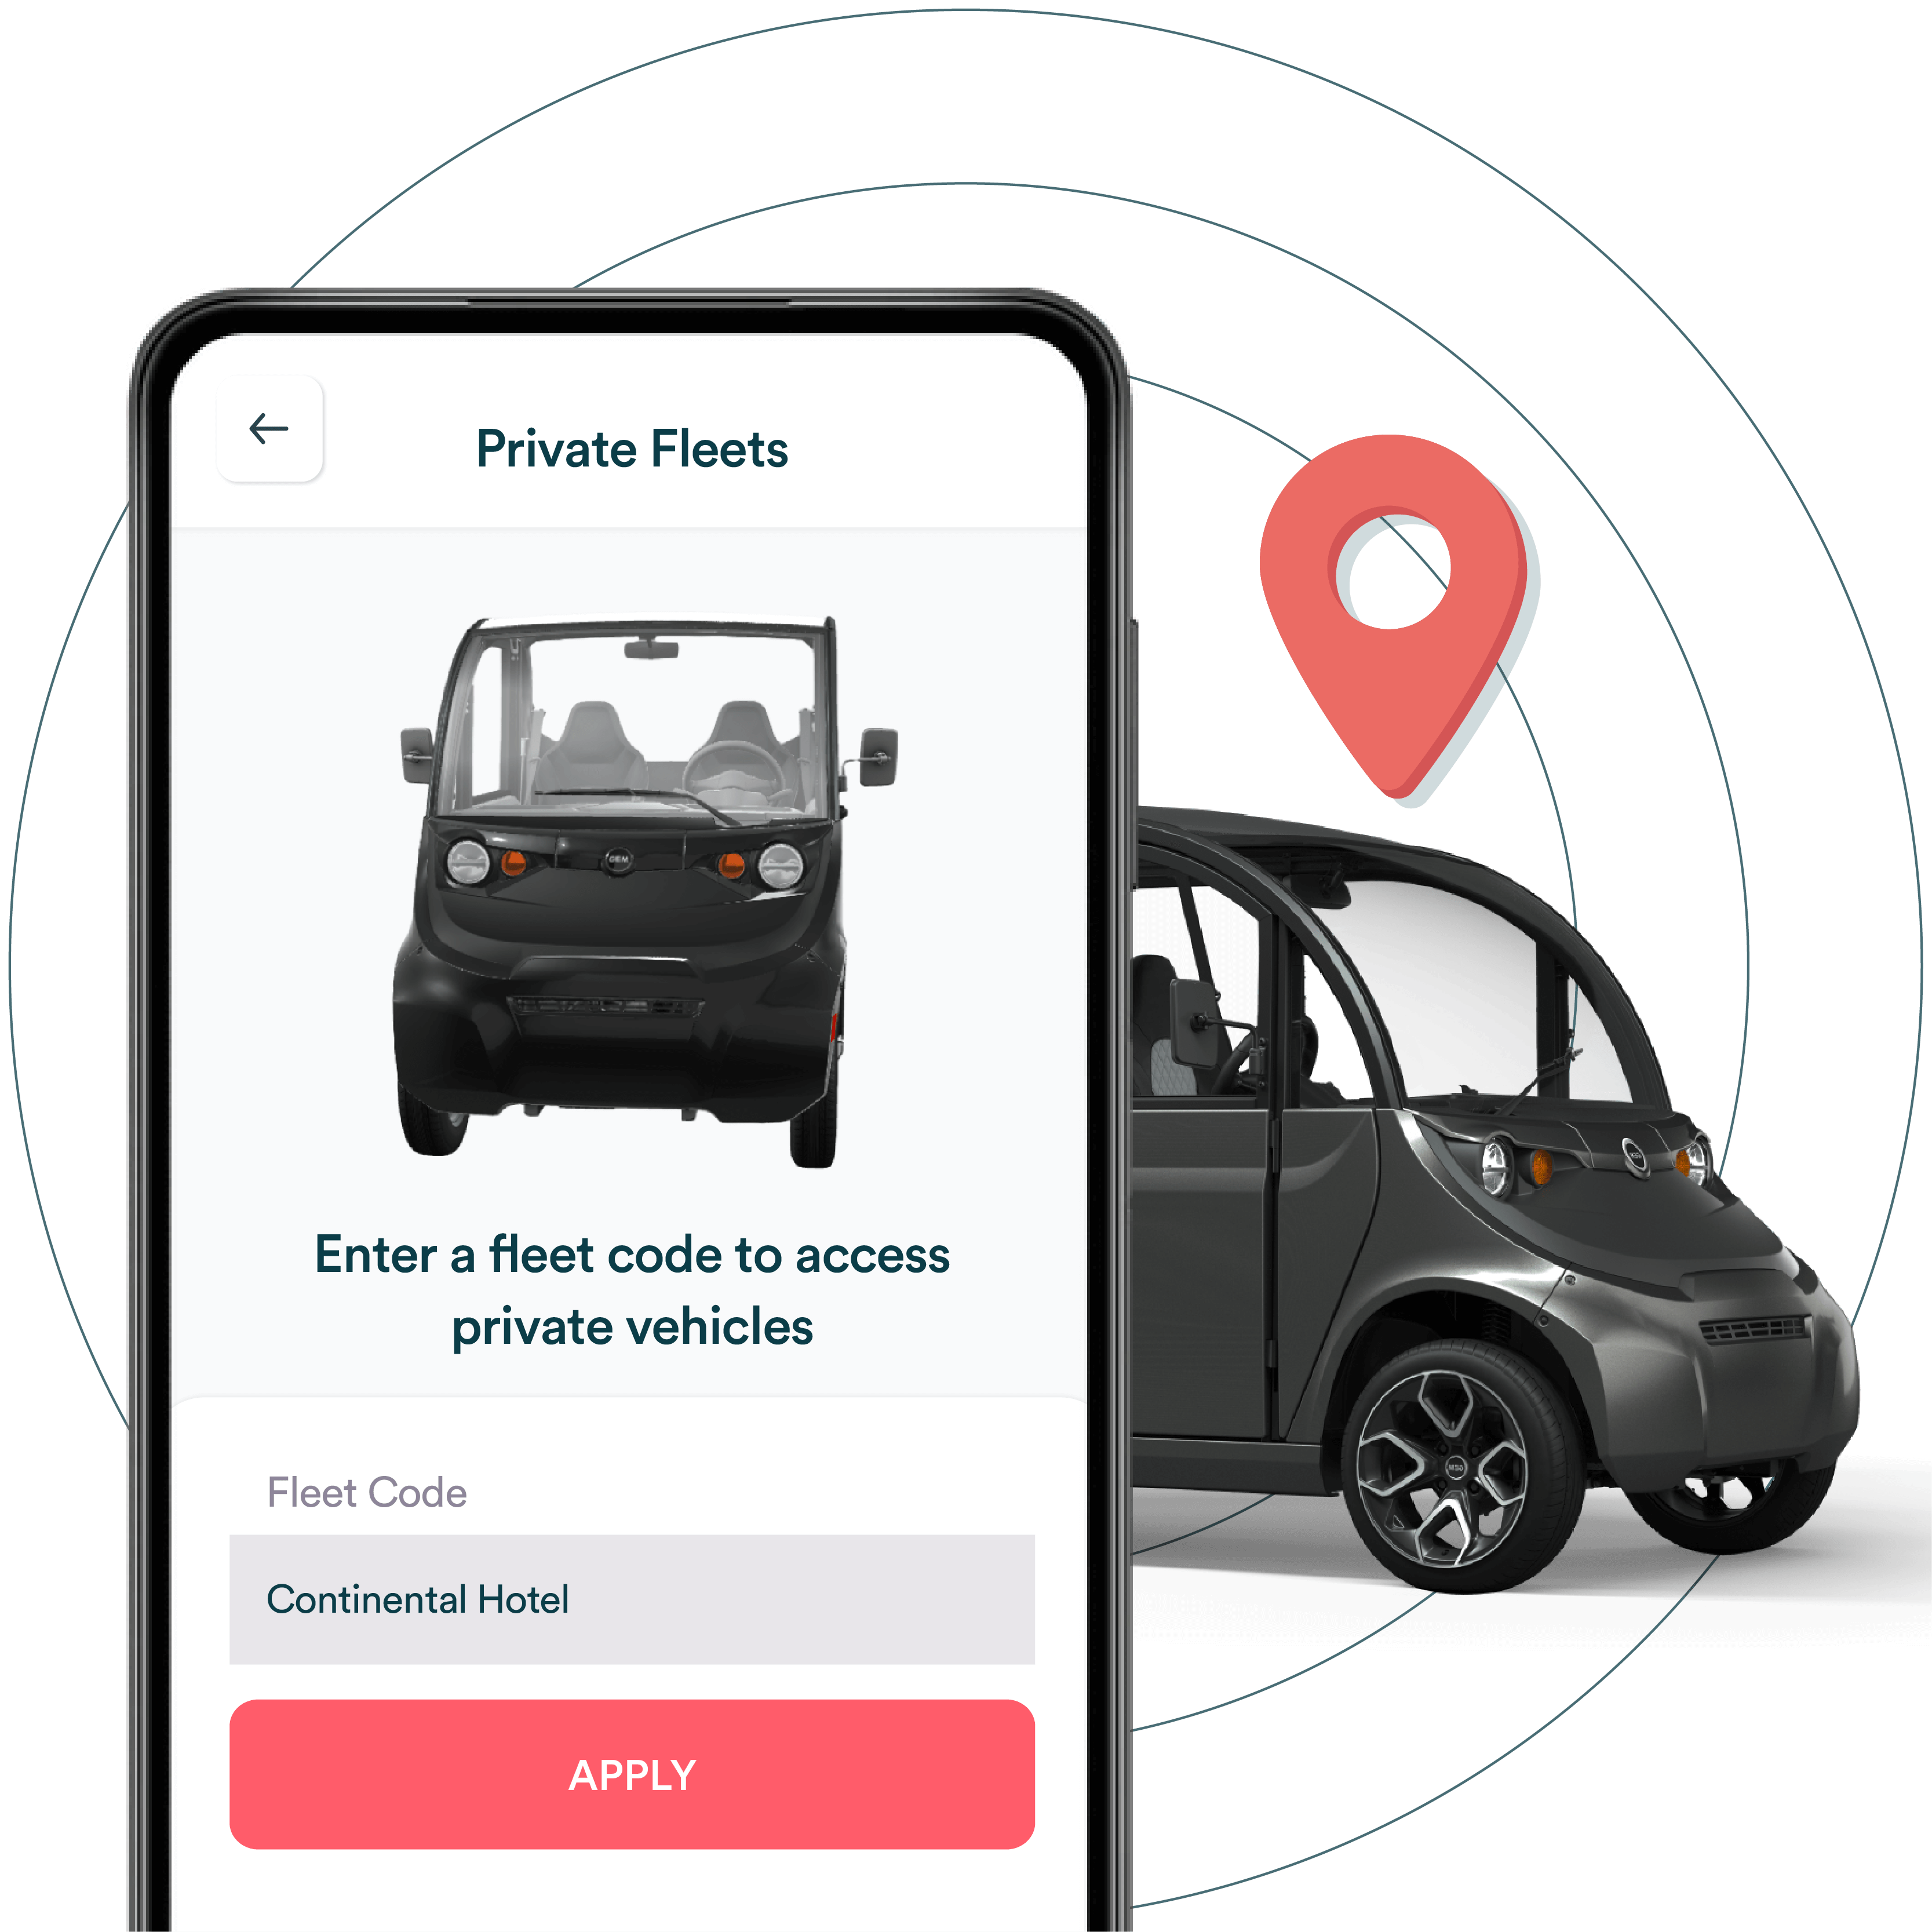 Joyride private fleet rental app with gem e2 vehicle and location pin